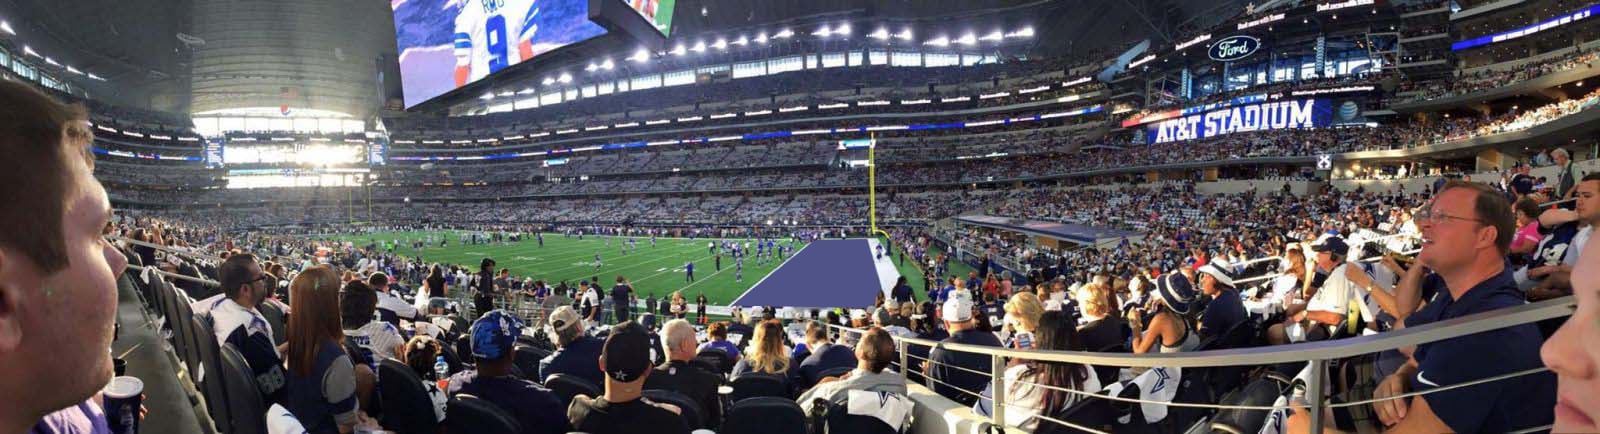 section c106, row 14 seat view  for football - at&t stadium (cowboys stadium)